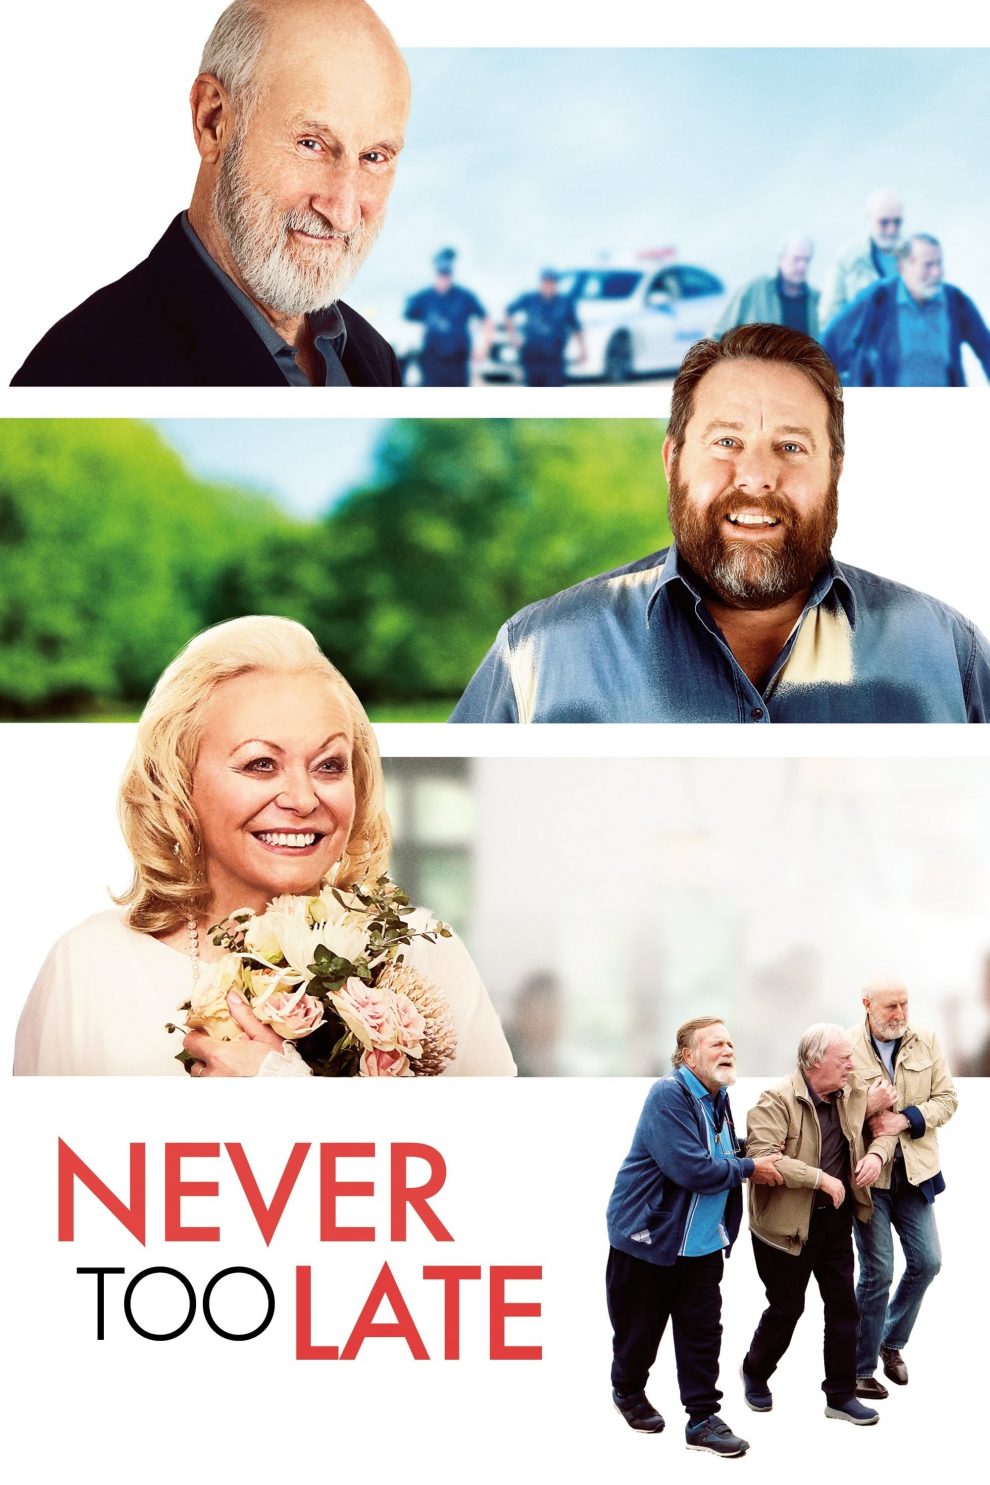 Poster for the movie "Never Too Late"